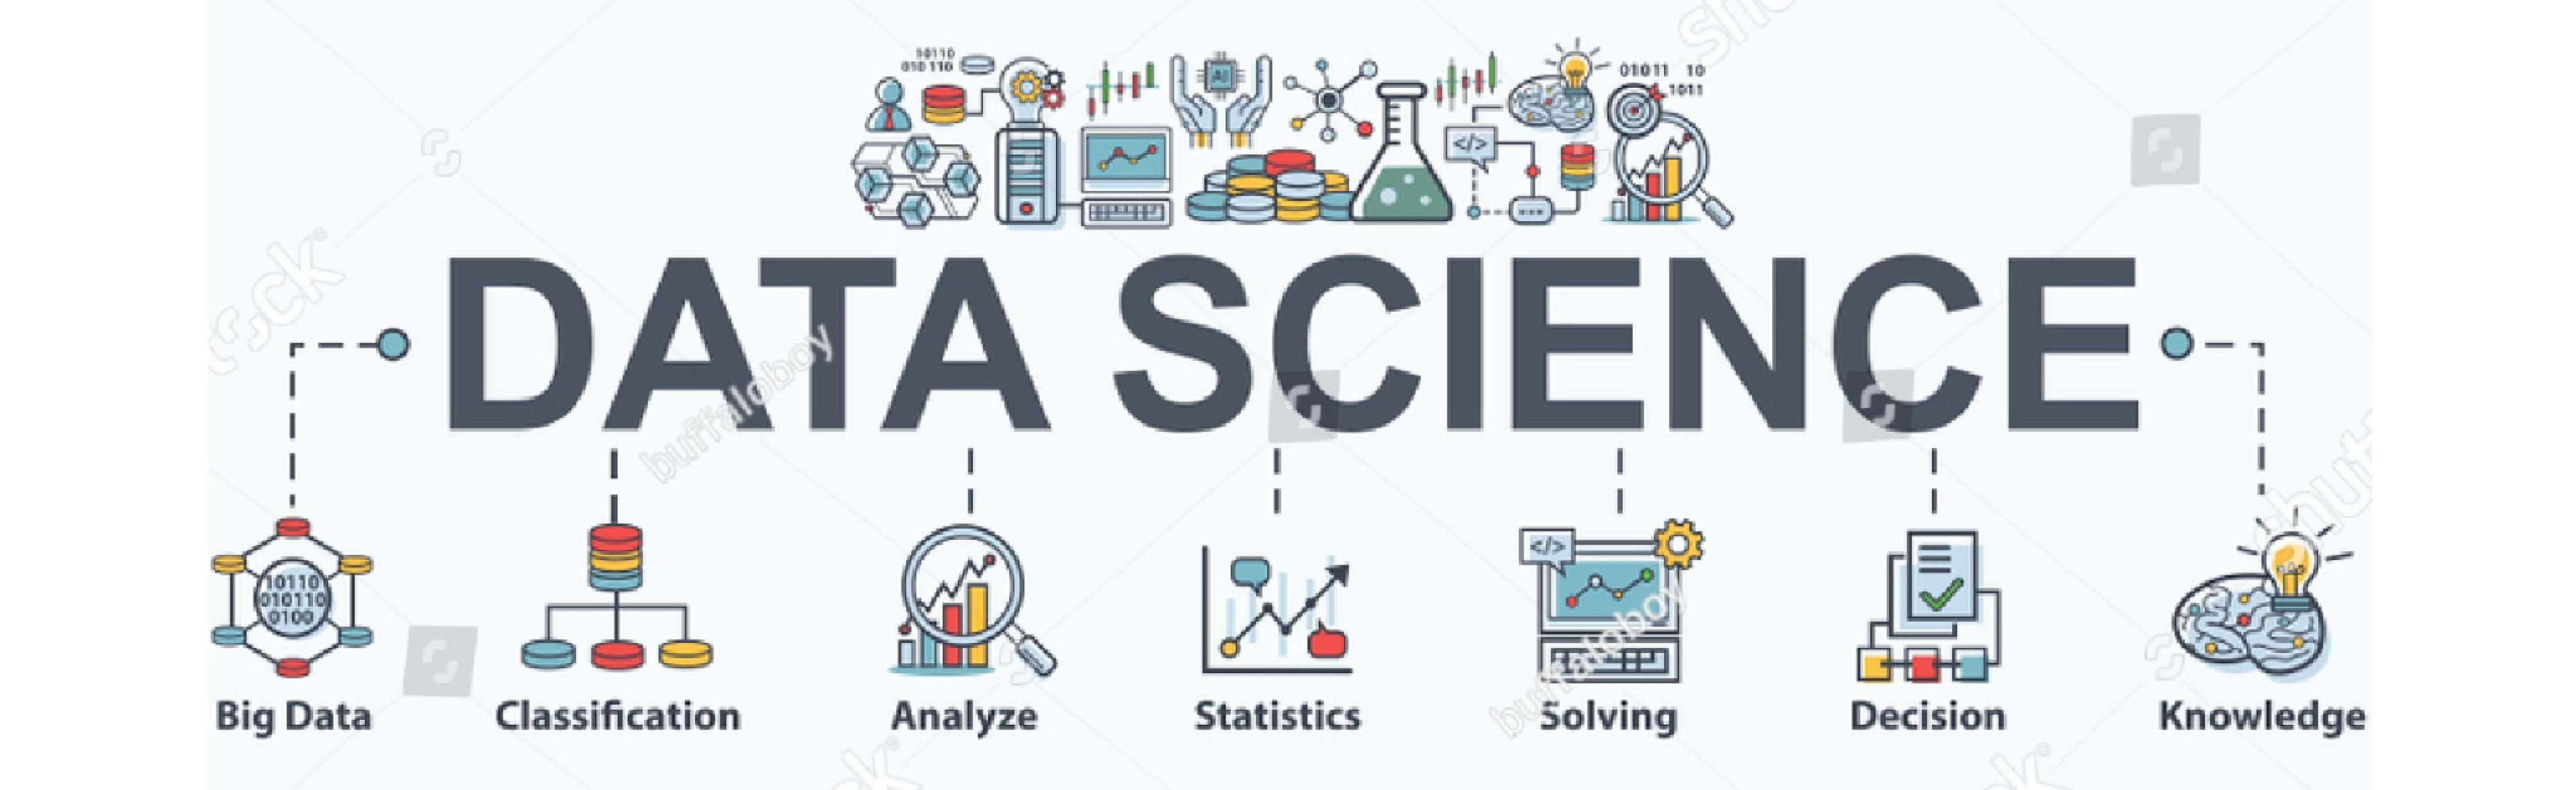 Understanding the Life Cycle of a Data Science Project.